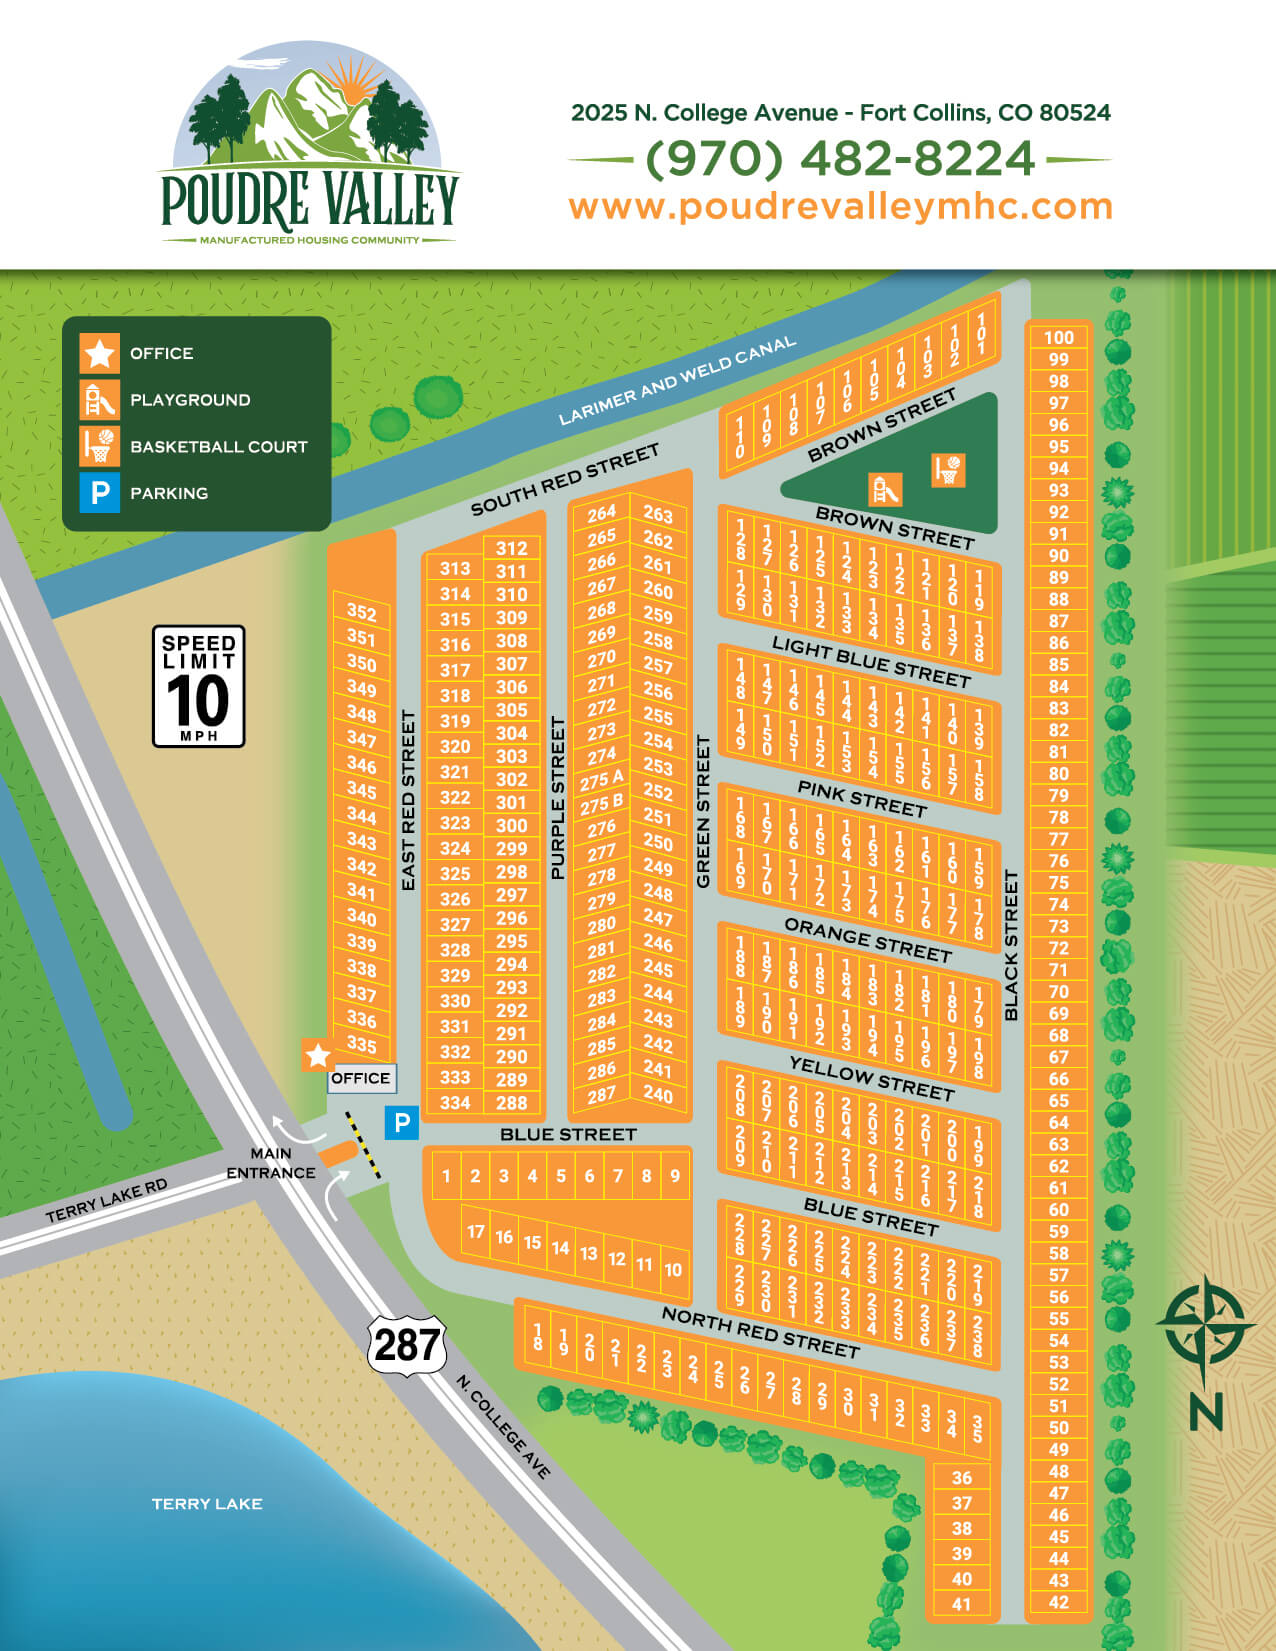 graphic map of poudre valley mhc